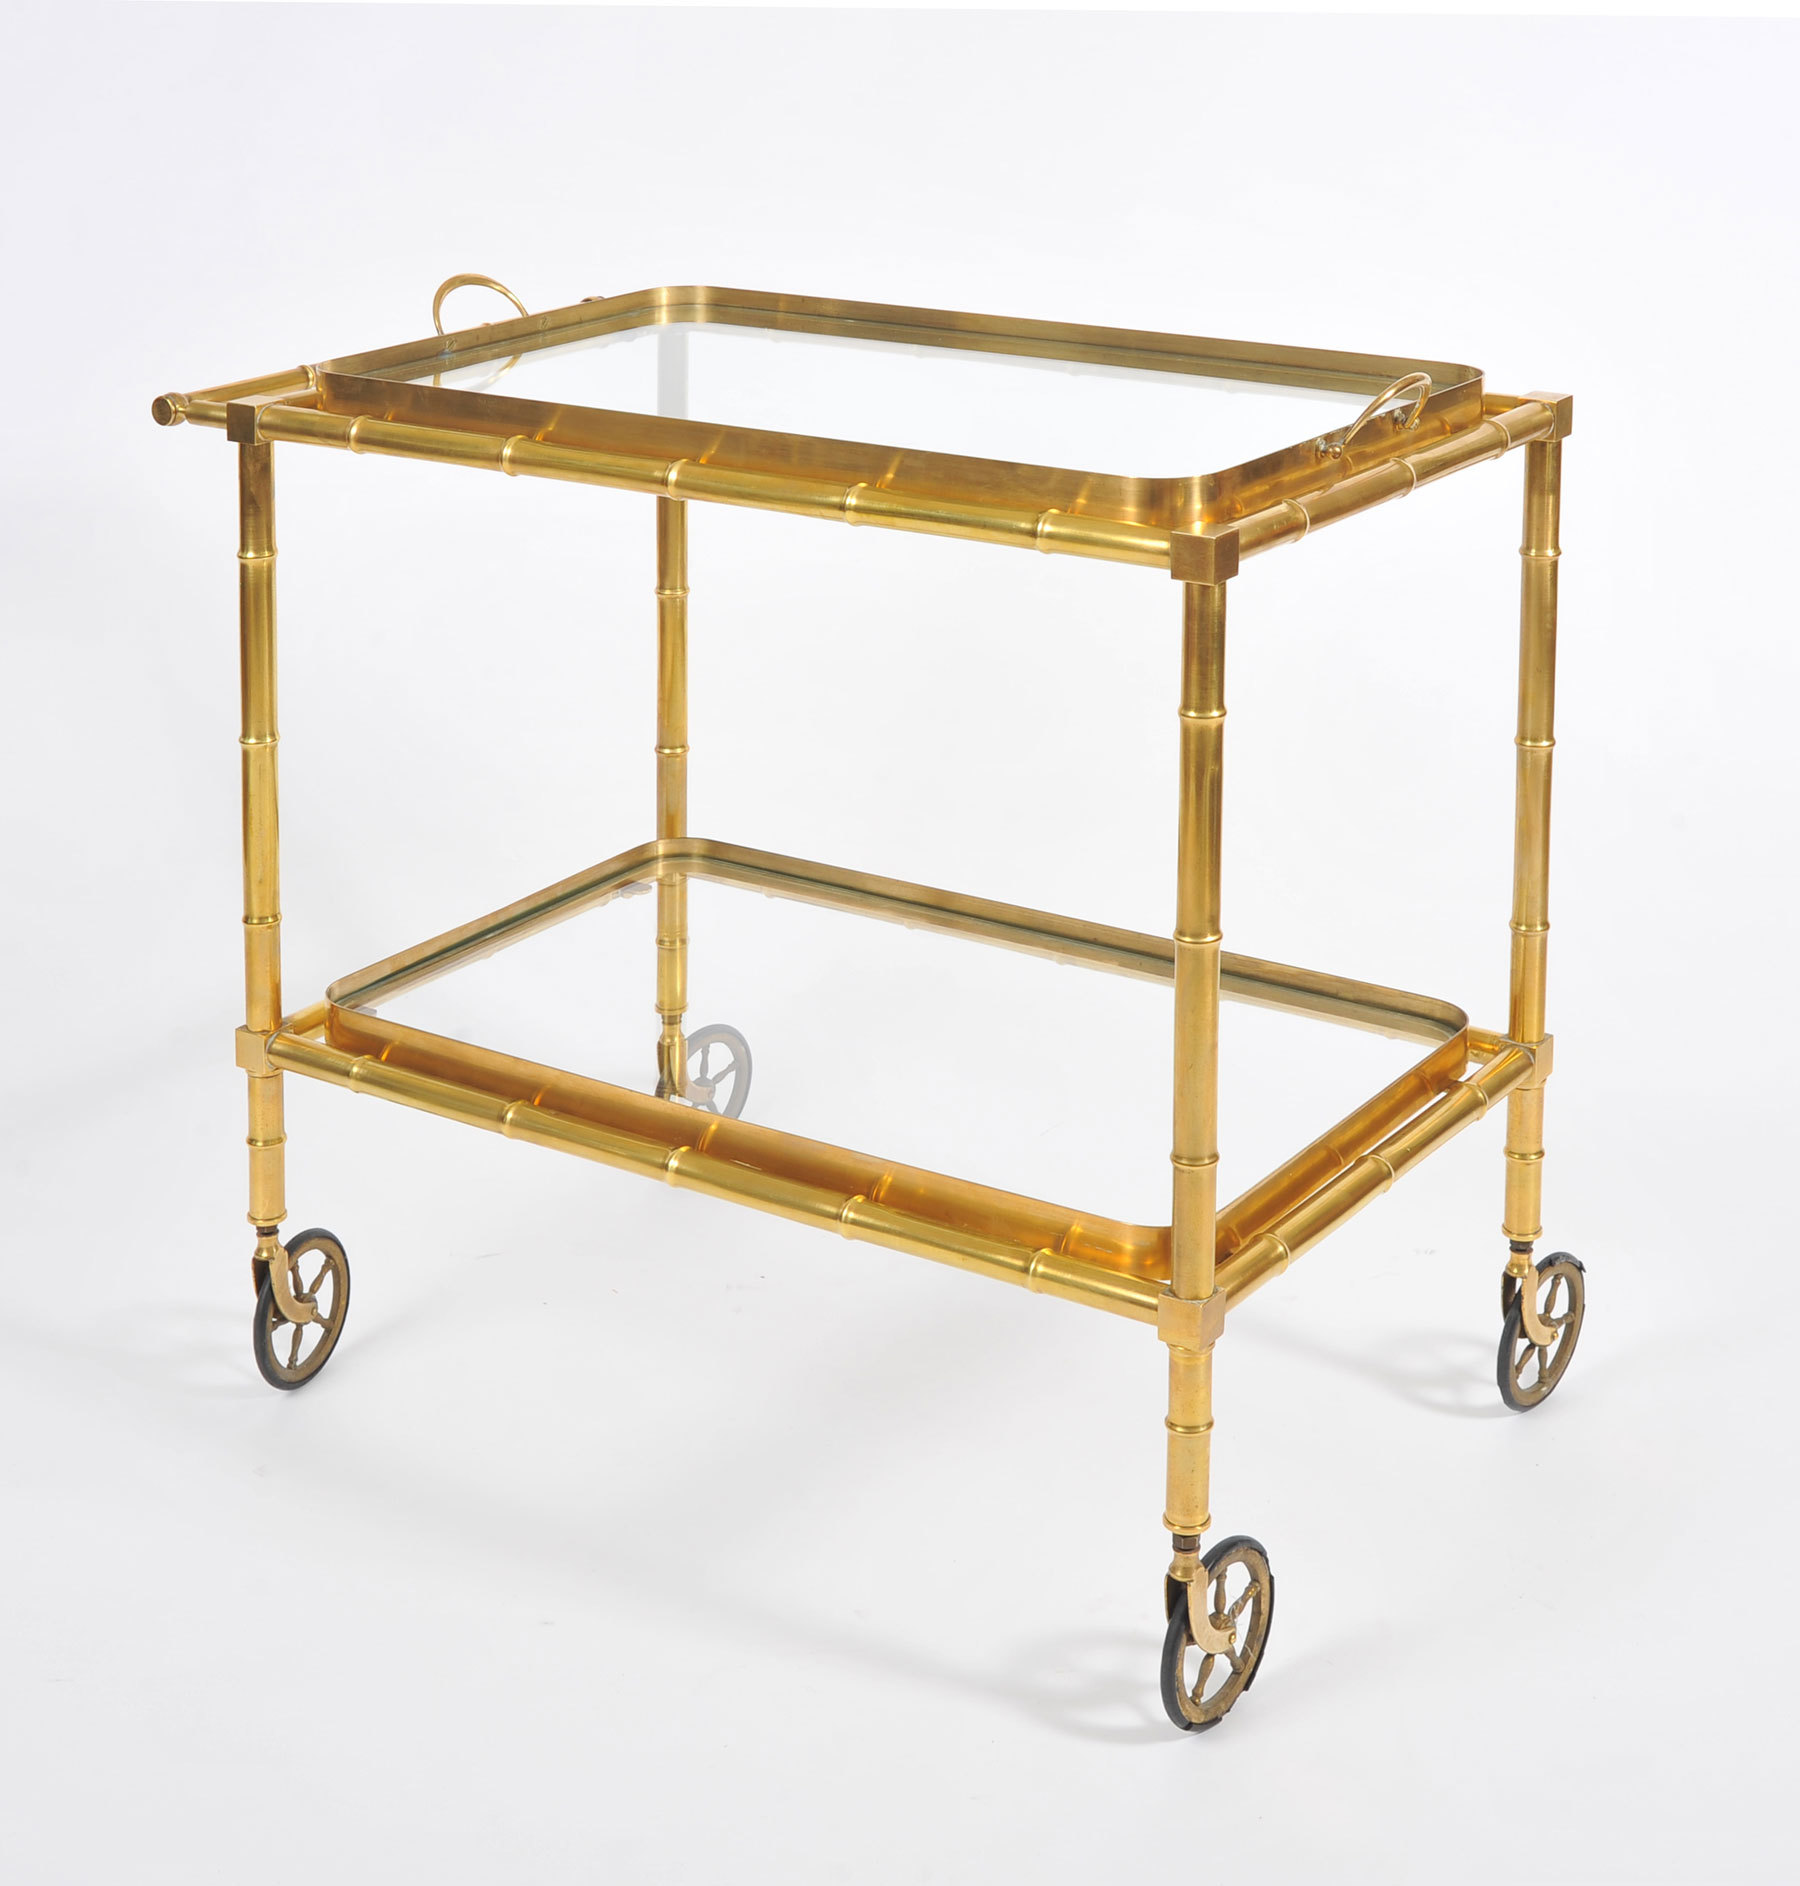 Vintage Patinated Faux Bamboo Brass Drinks Trolley - Decorative